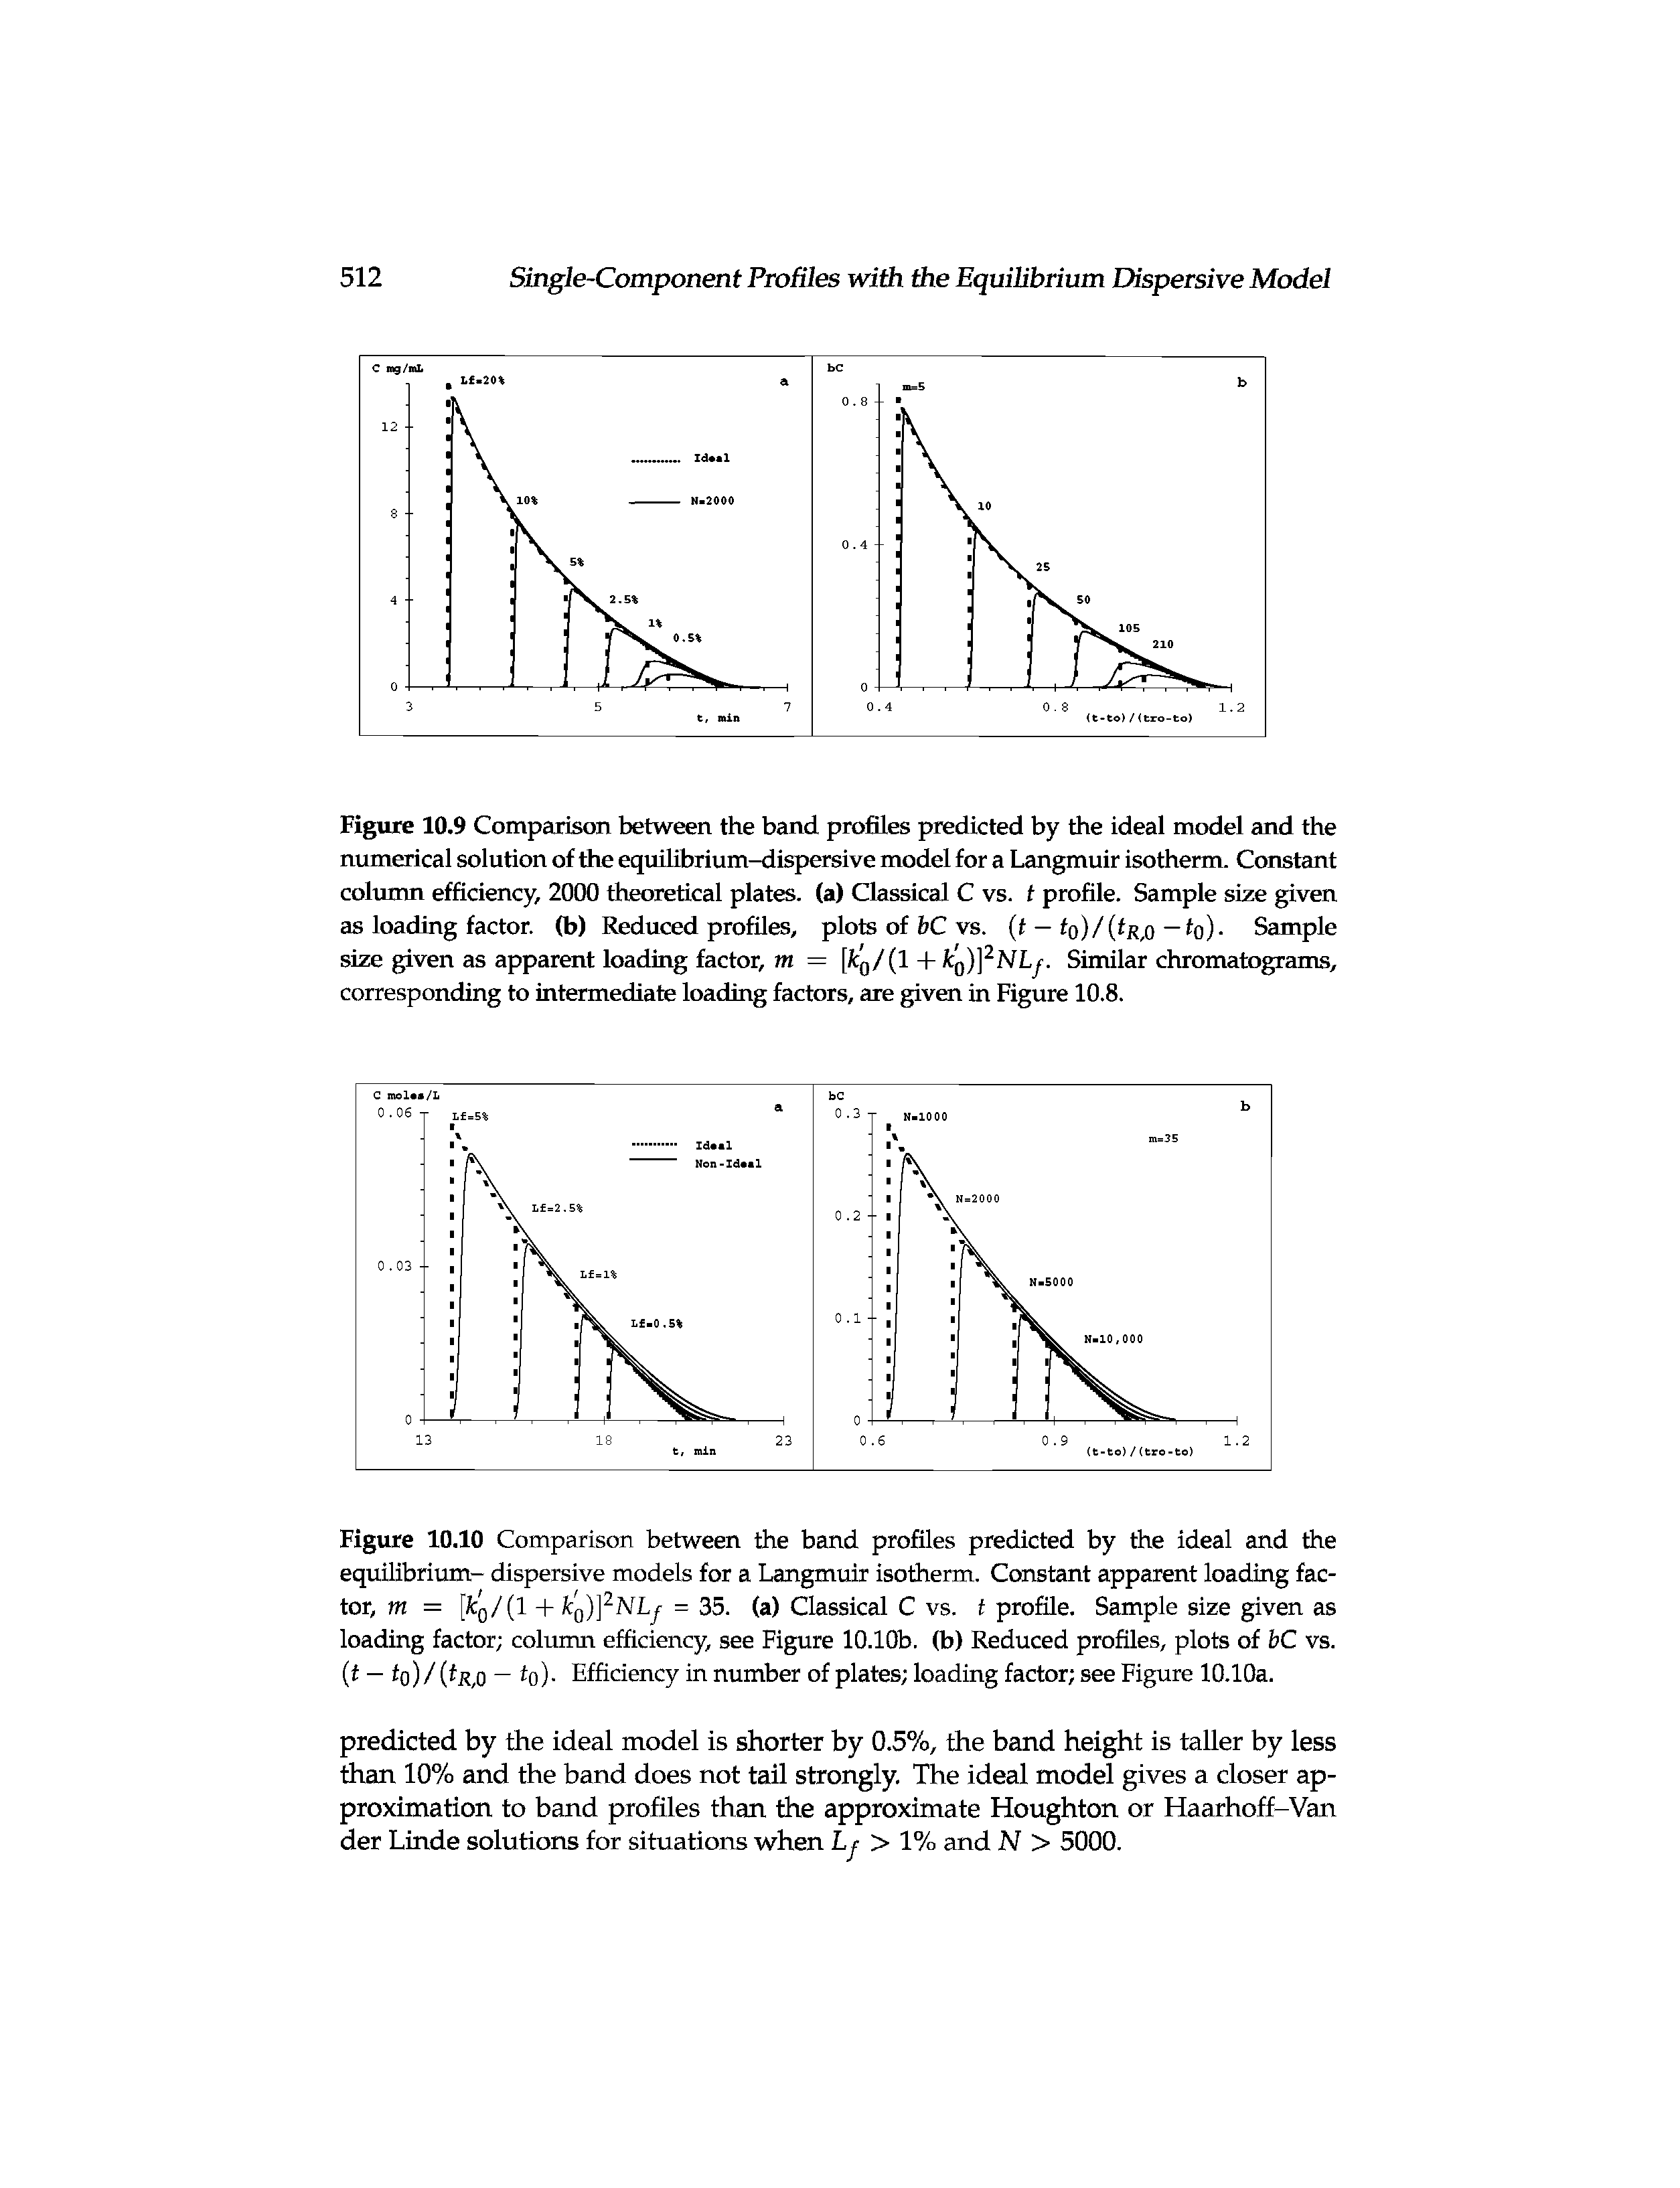 Figure 10.9 Comparison between the band profiles predicted by the ideal model and the numerical solution of the equilibrium-dispersive model for a Langmuir isotherm. Constant column efficiency, 2000 theoretical plates, (a) Classical C vs. f profile. Sample size given as loading factor, (b) Reduced profiles, plots of bC vs. (t — fo)/(fR,o — to)- Sample size given as apparent loading factor, m = [Icq/(1 + J q)] NLj. Similar chromatograms, corresponding to intermediate loading factors, are given in Figure 10.8.